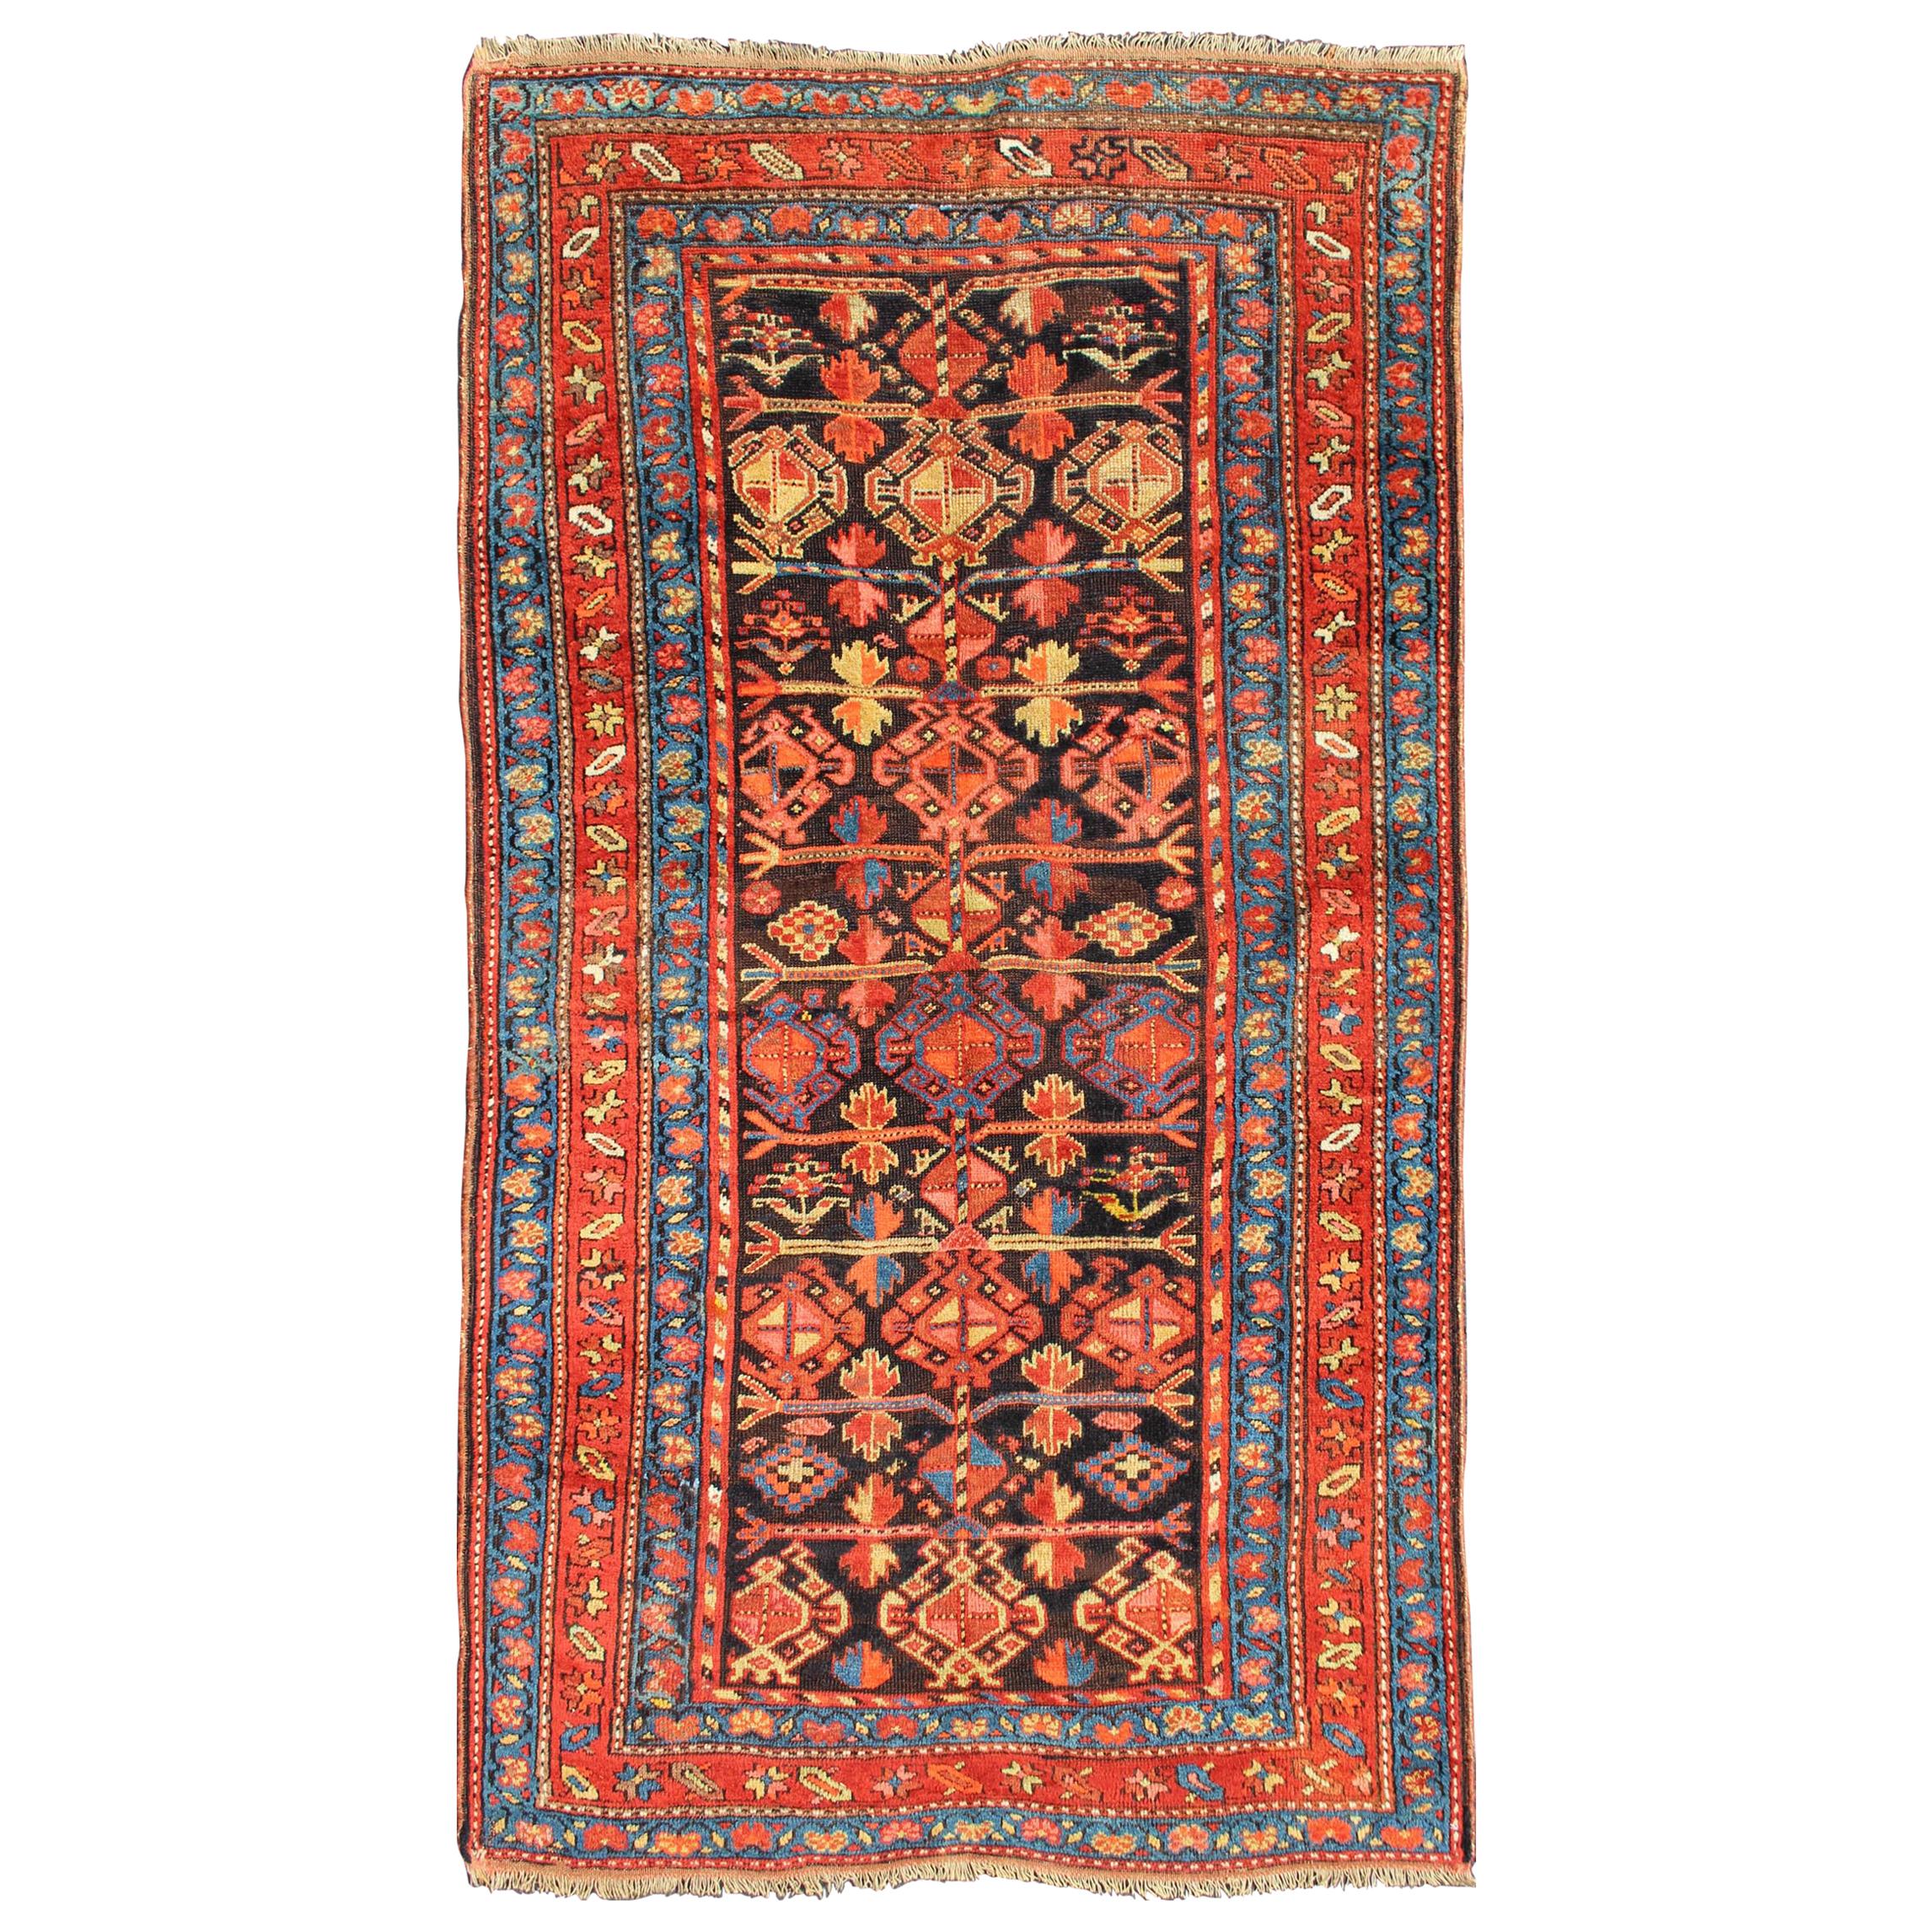 All-Over Tribal Design Antique Persian Kurdish Rug in Blue & Red